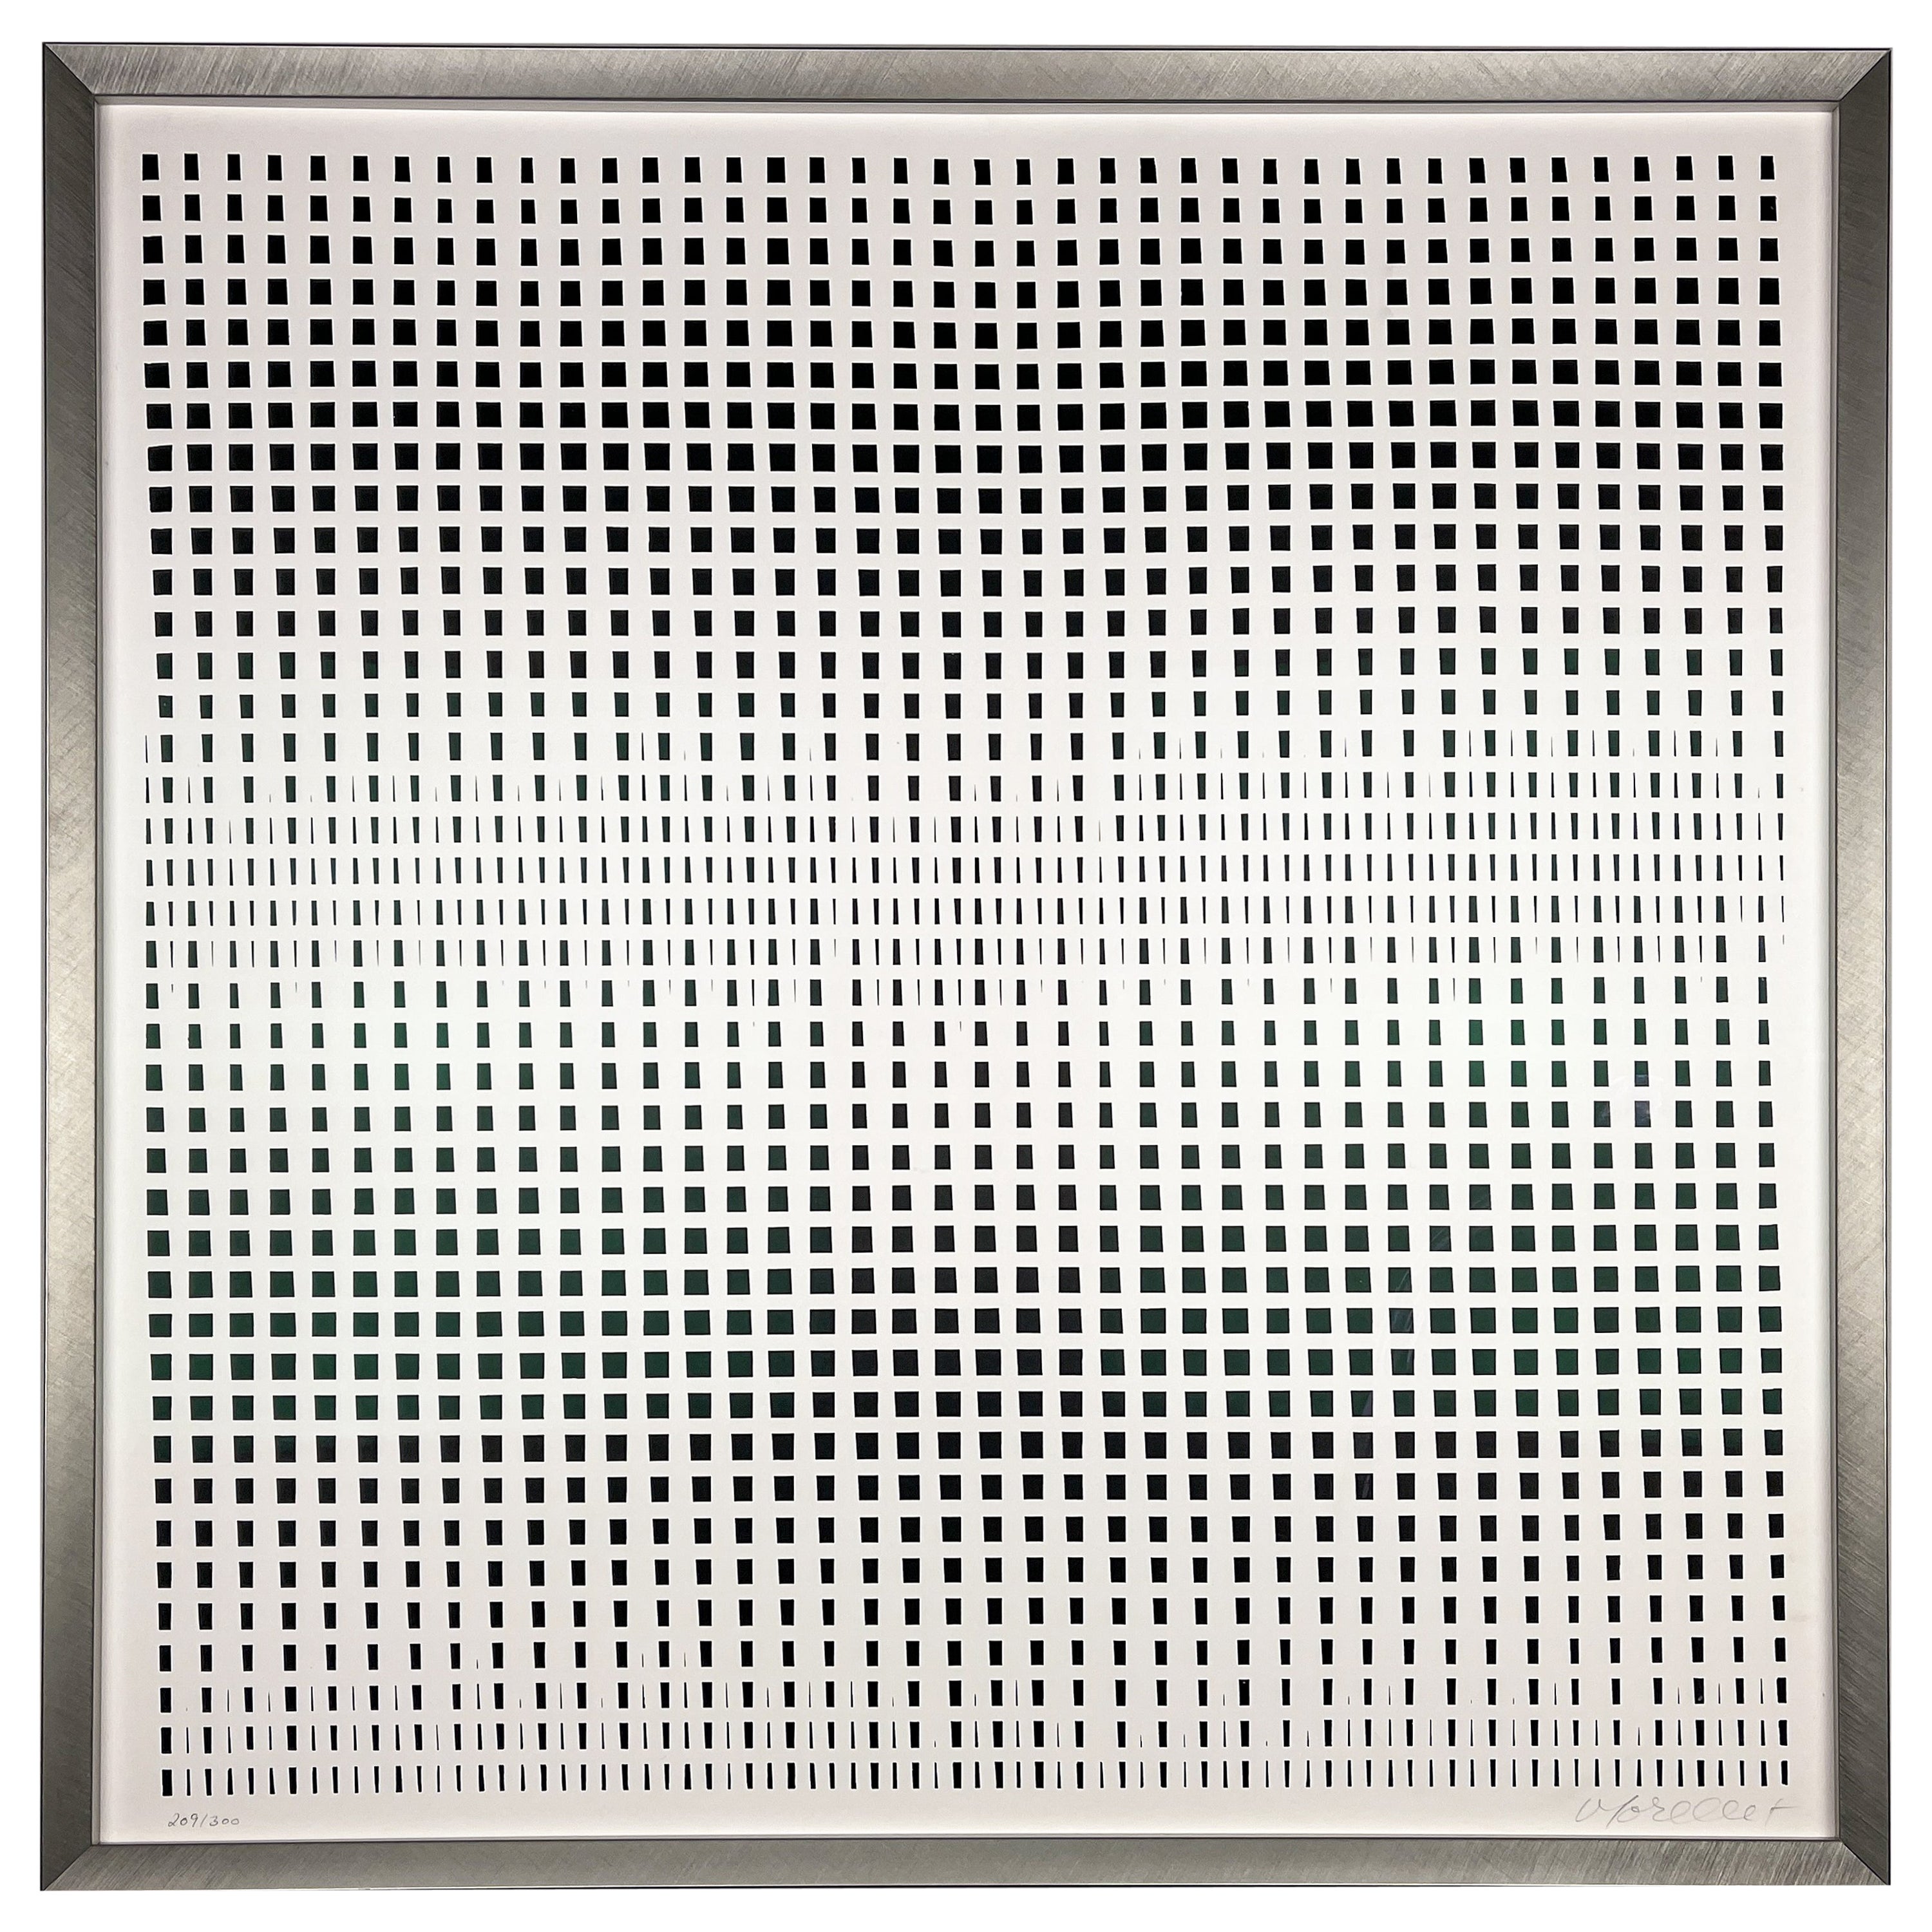 Artist 
François Morellet (Cholet 1926 – Cholet 2016) was a French painter, sculptor, and light artist. His early work prefigured minimal art and conceptual art, and he played a prominent role in the development of geometrical abstract